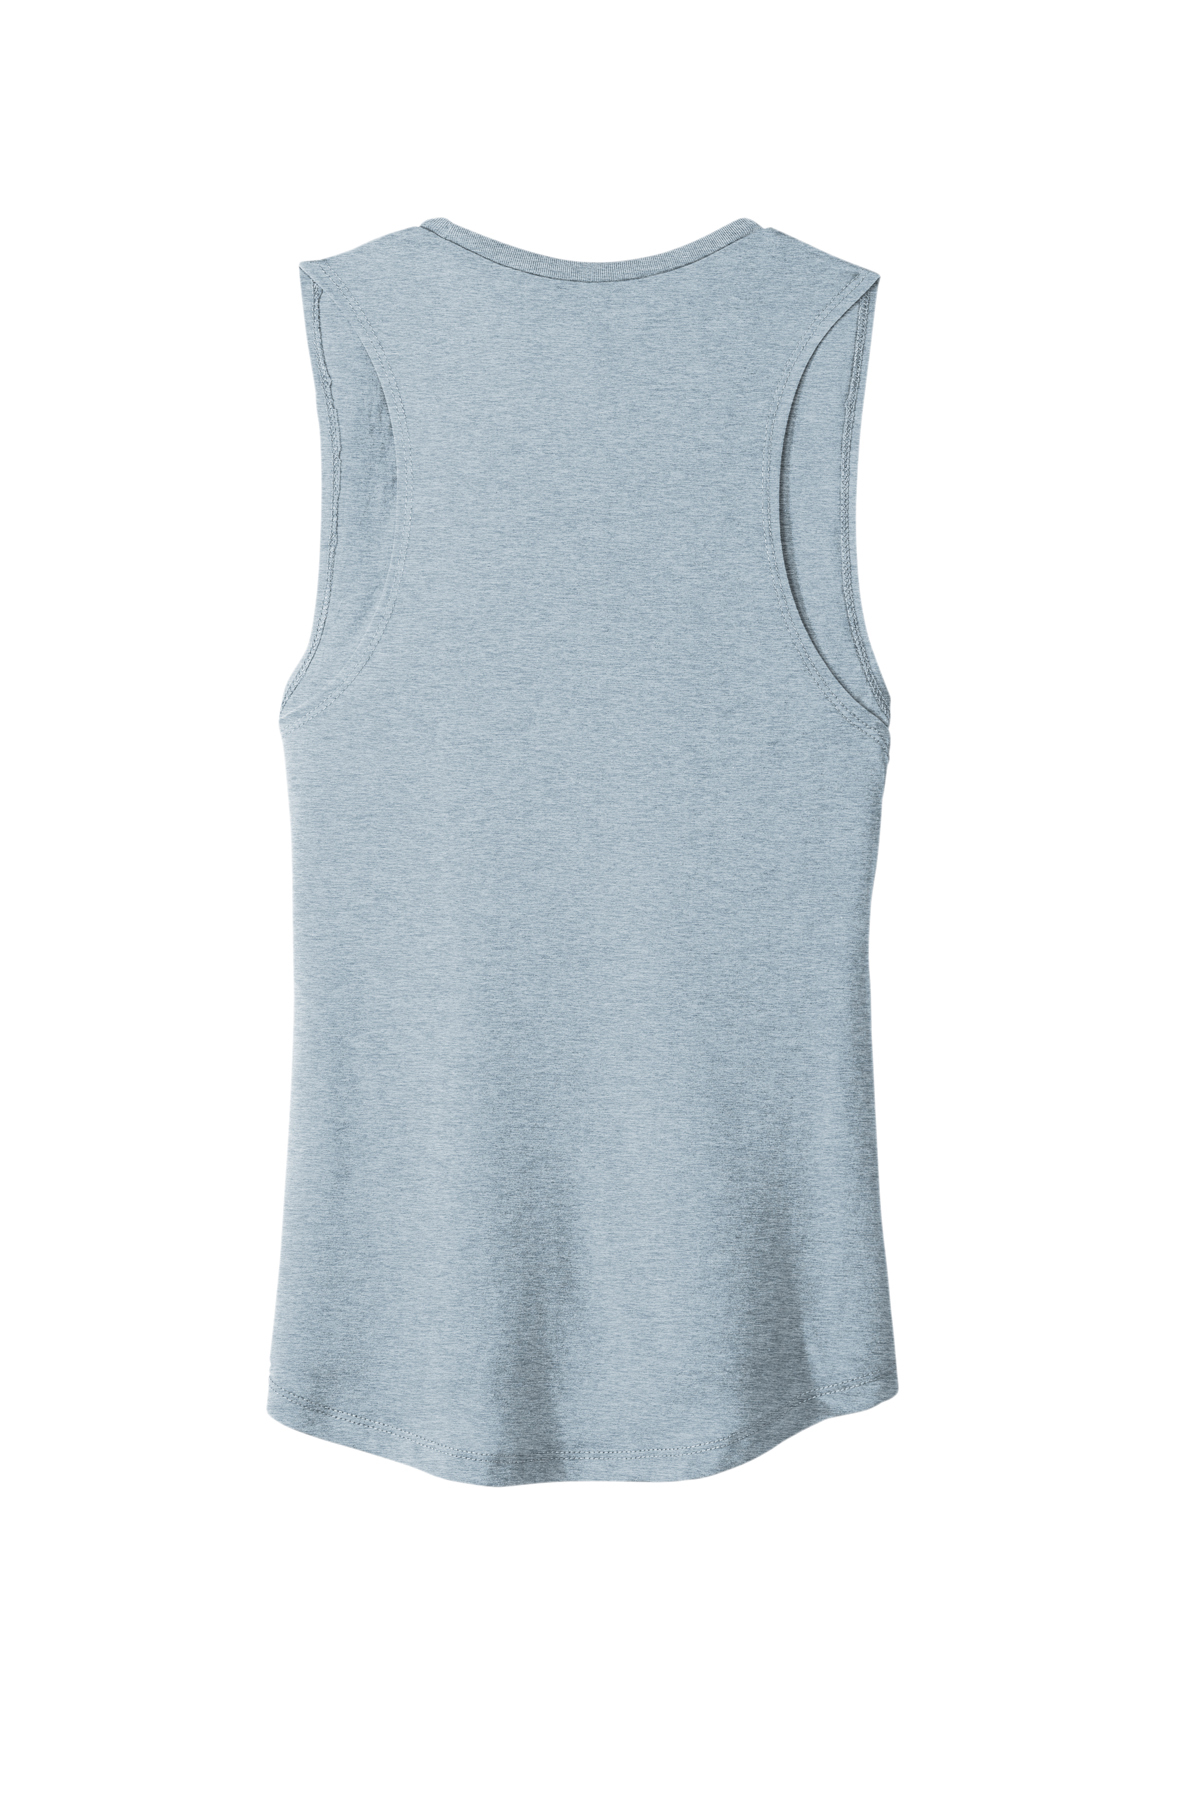 Next Level Women’s Festival Muscle Tank | Product | Company Casuals